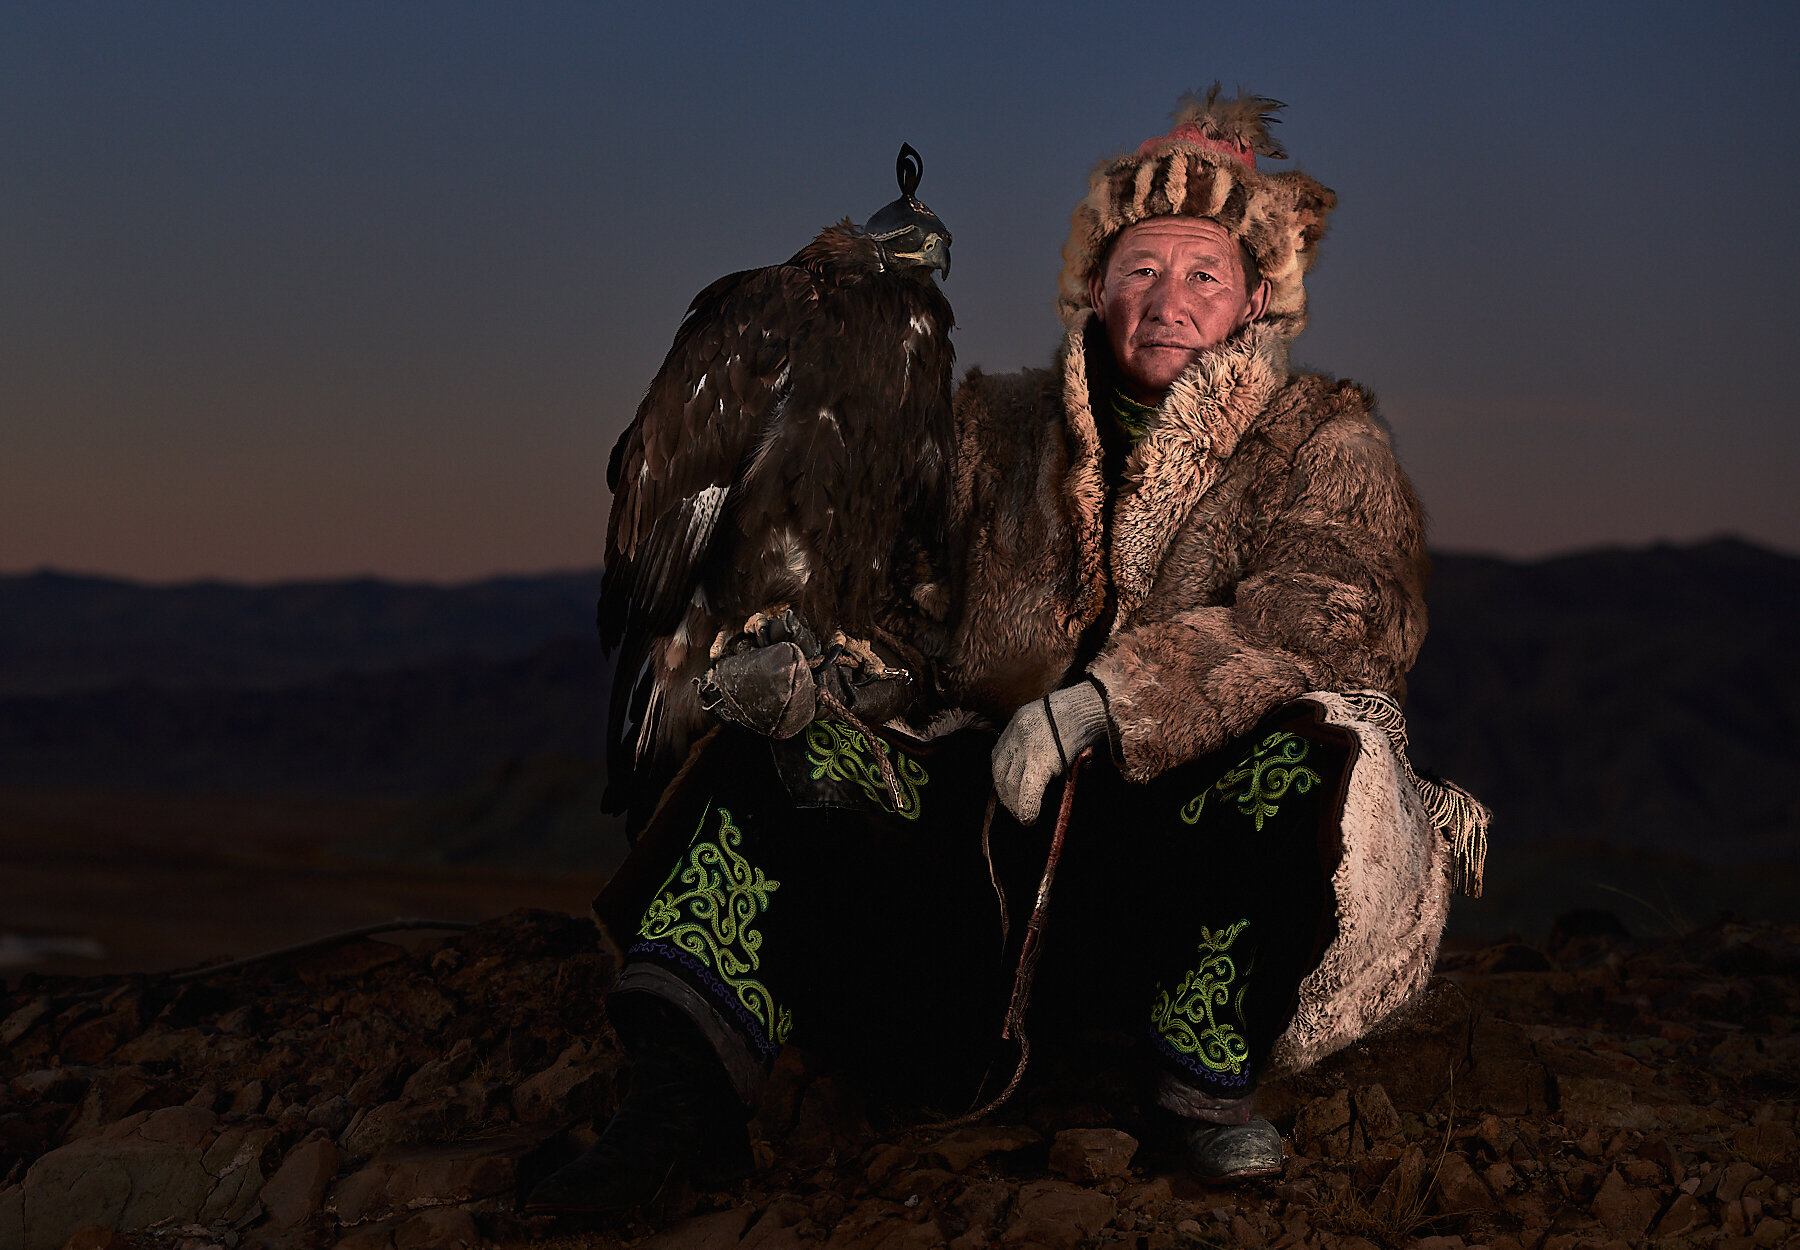 Bashakhan, one of the most famous eagle hunters with his eagle